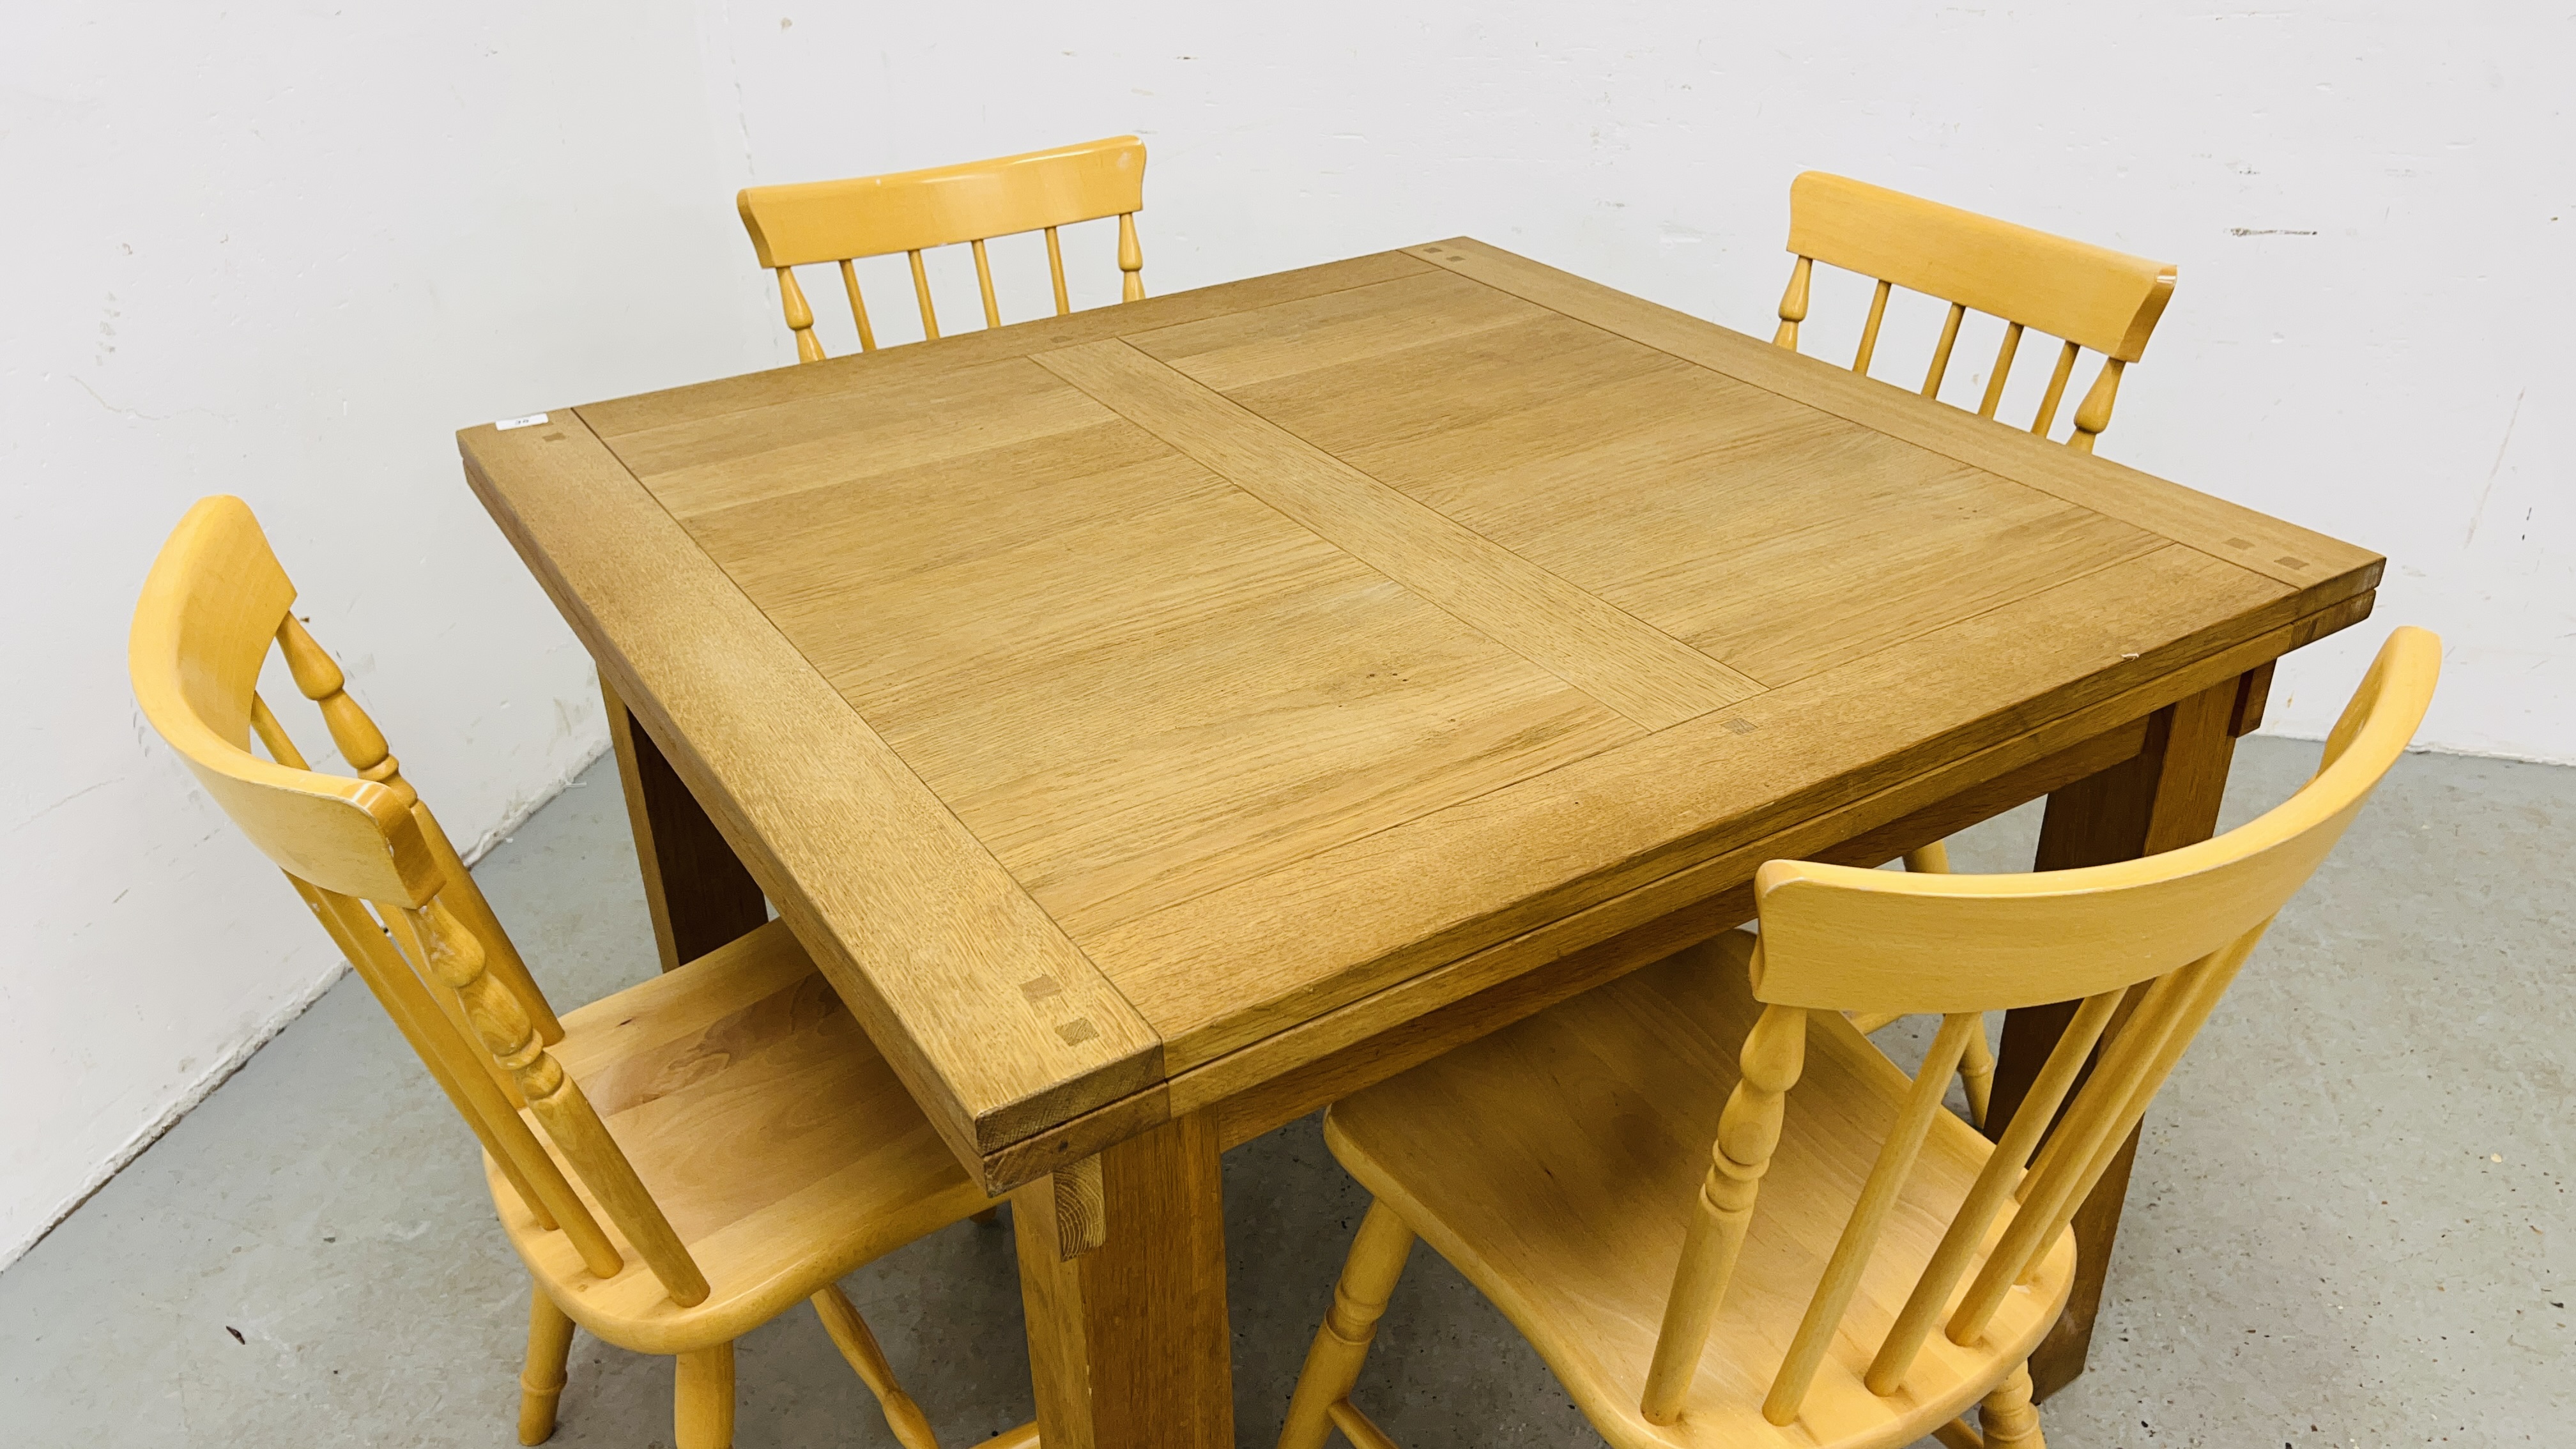 A SOLID OAK EXTENDING DINING TABLE ALONG WITH A SET OF FOUR BEECH WOOD DINING CHAIRS - Image 4 of 14